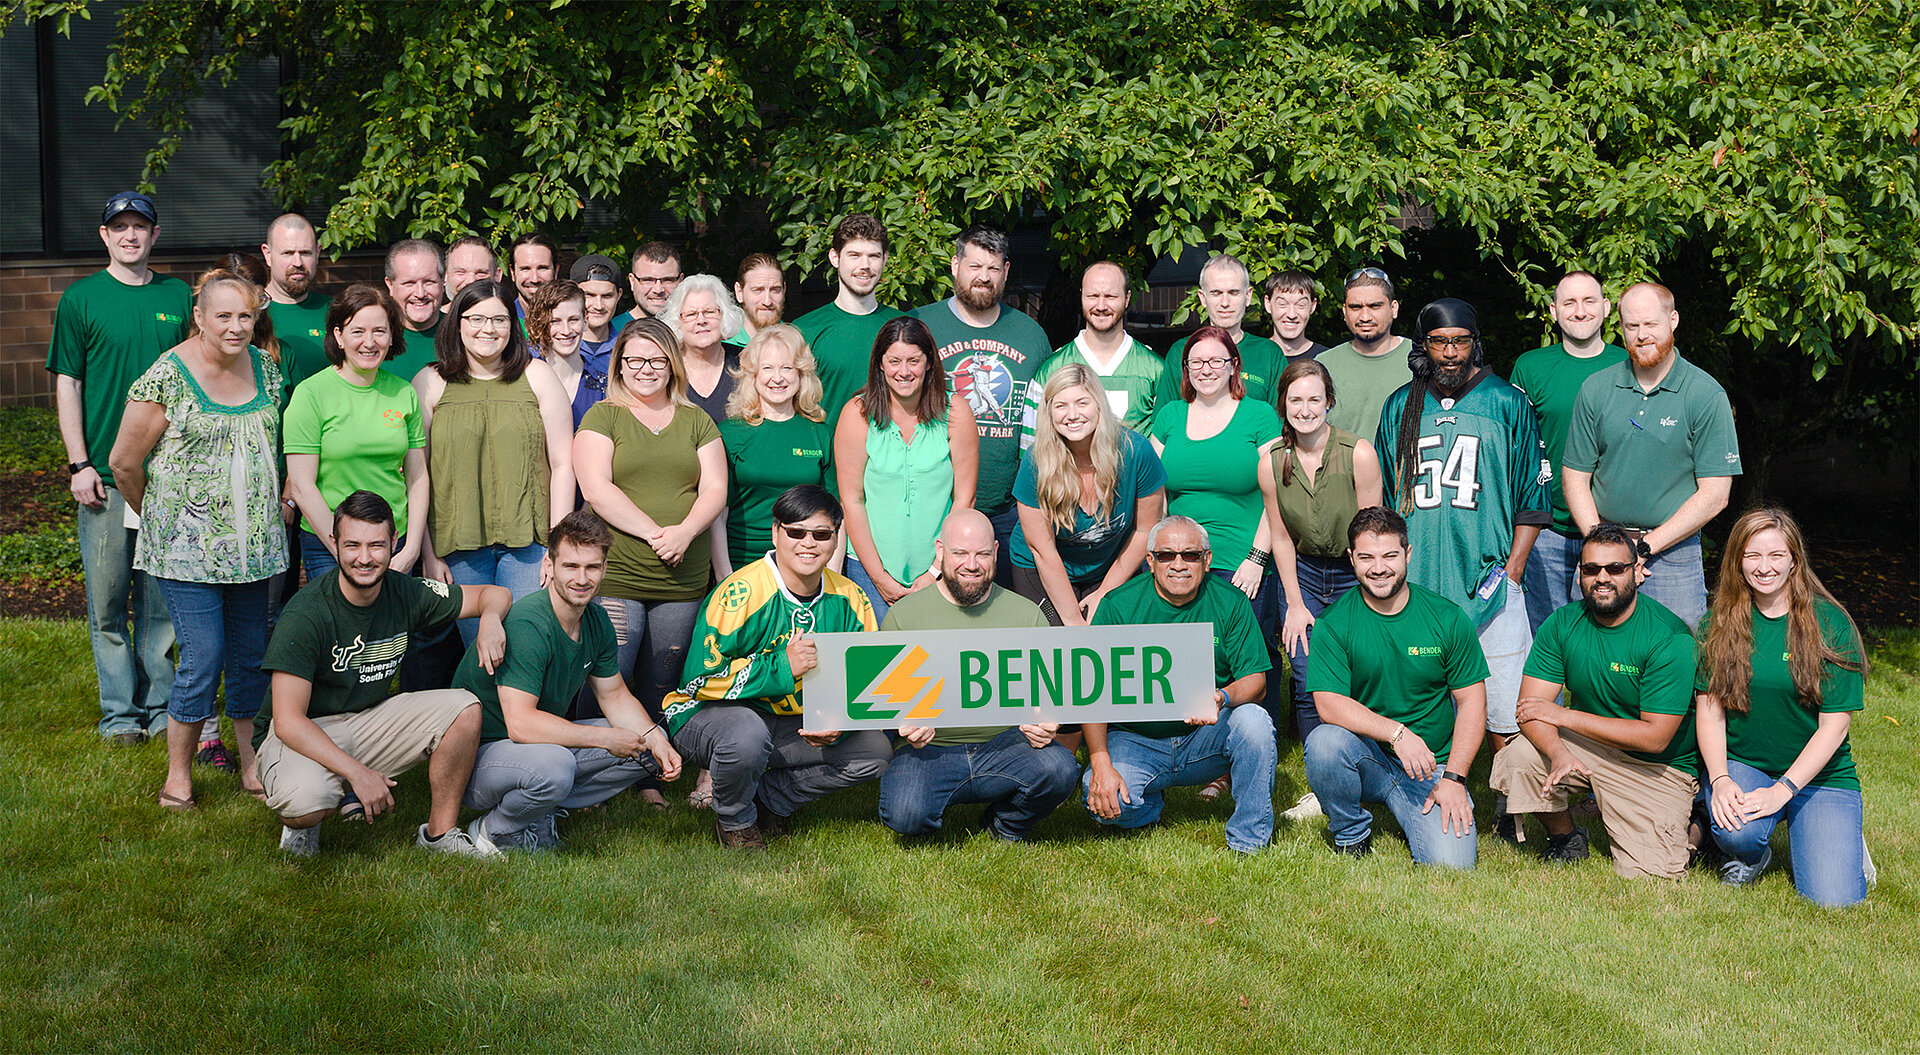 Bender Inc. team at our Exton location celebrating the announcement of going green!